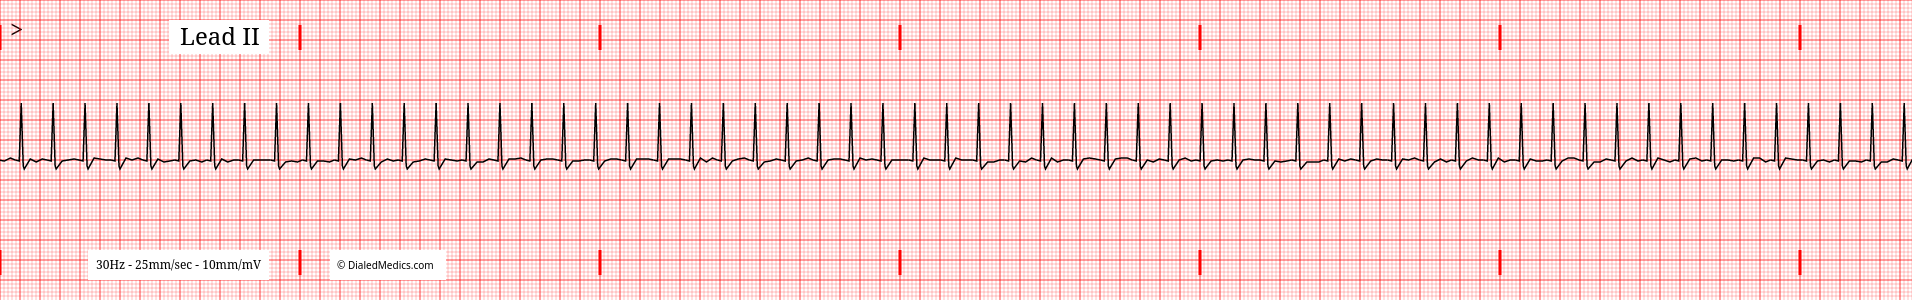 EKG tracing of SVT with a HR of 188bpm.